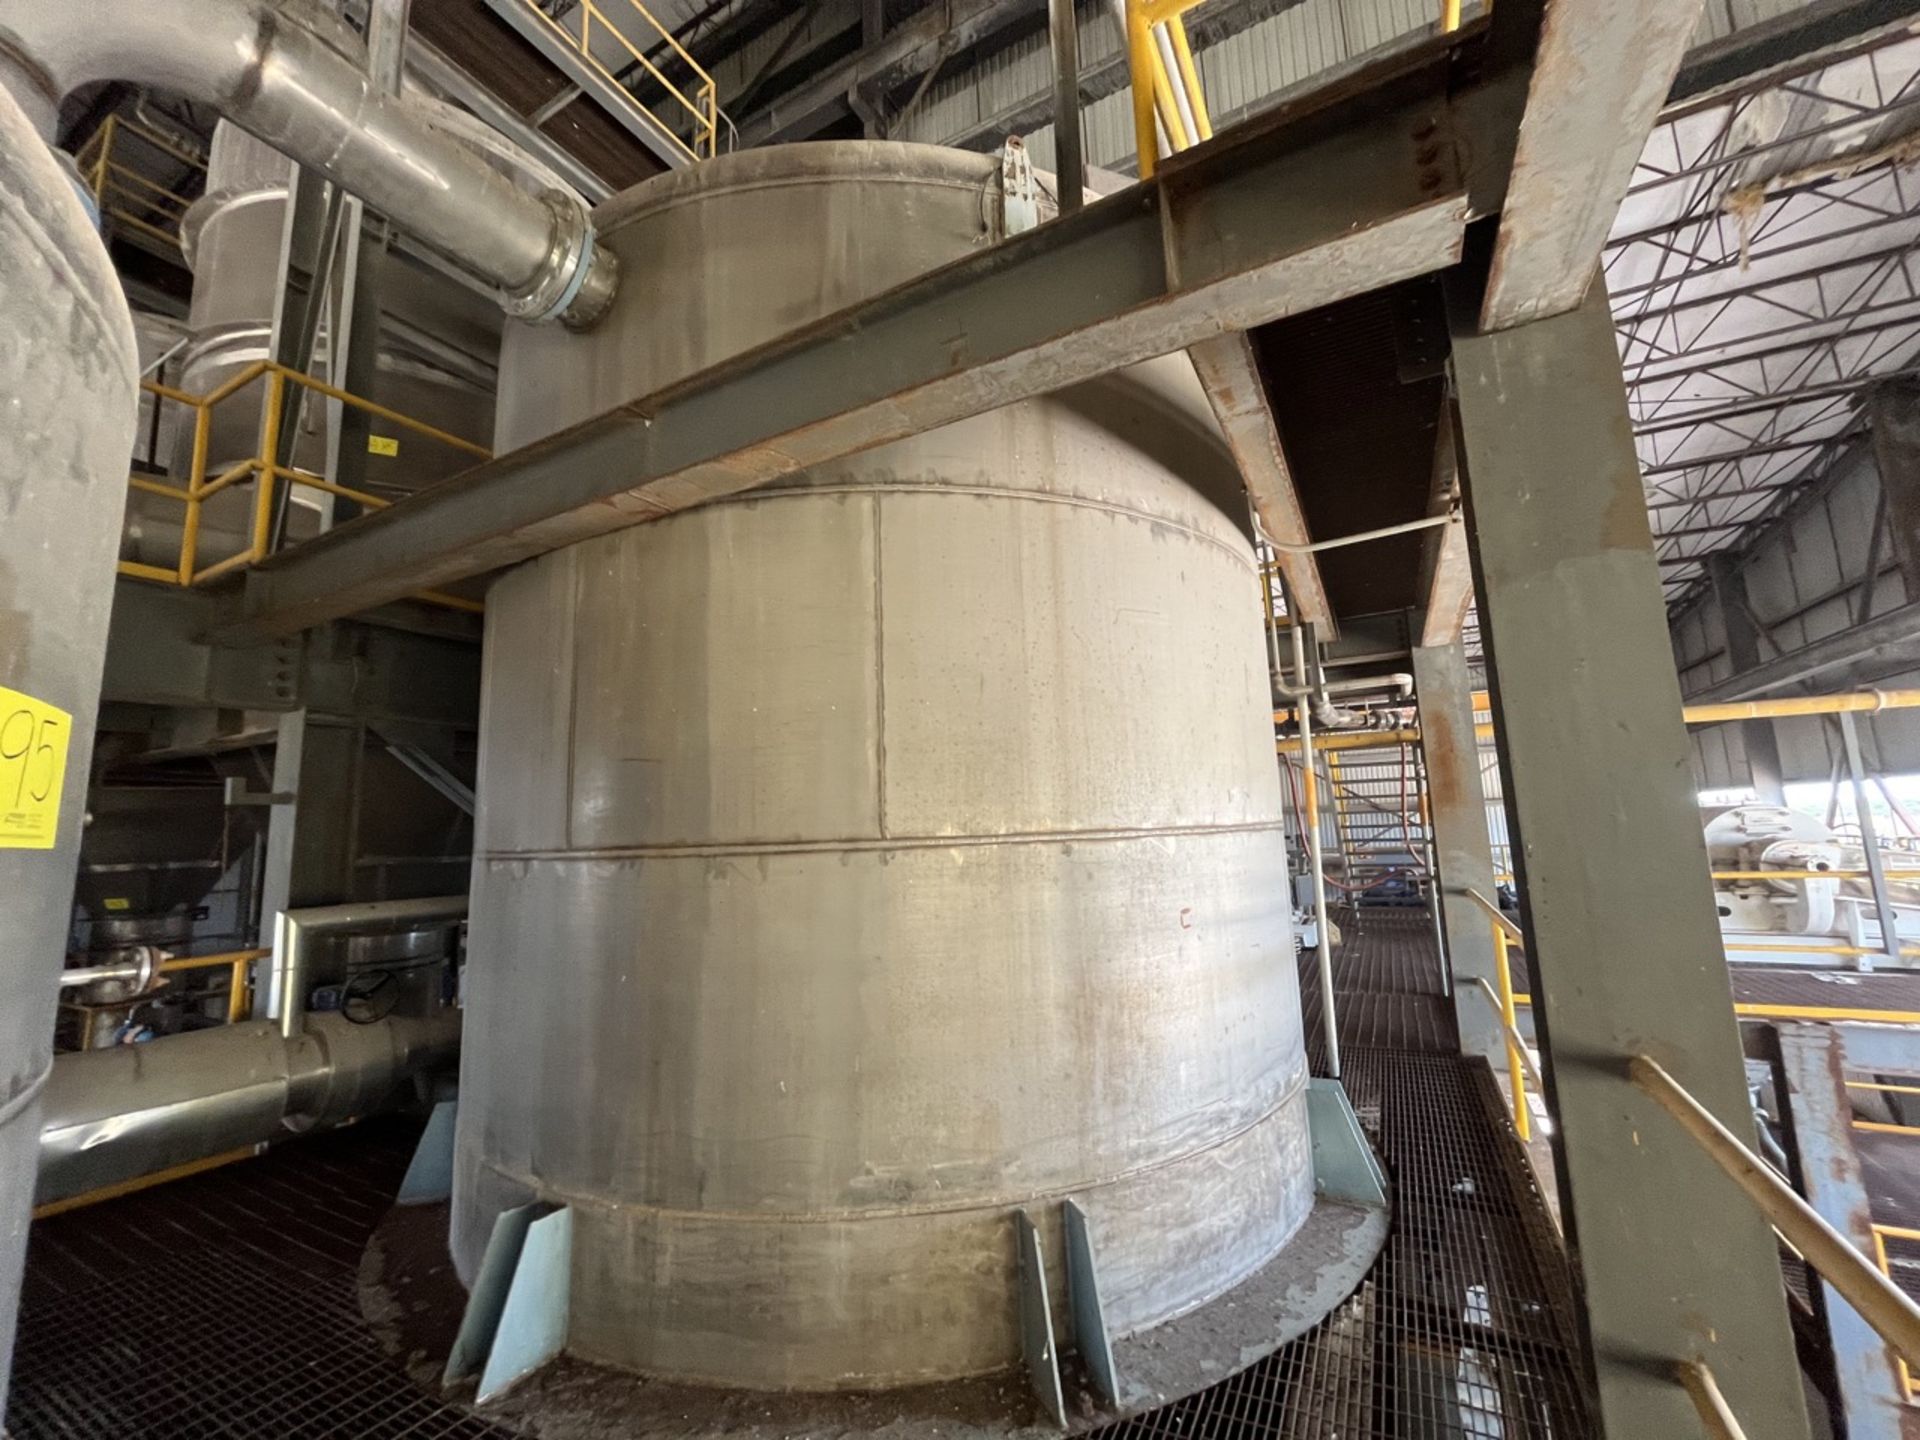 Conical storage tank with stainless steel toriesferica lid measures approximately 4.30 meters in di - Image 22 of 37